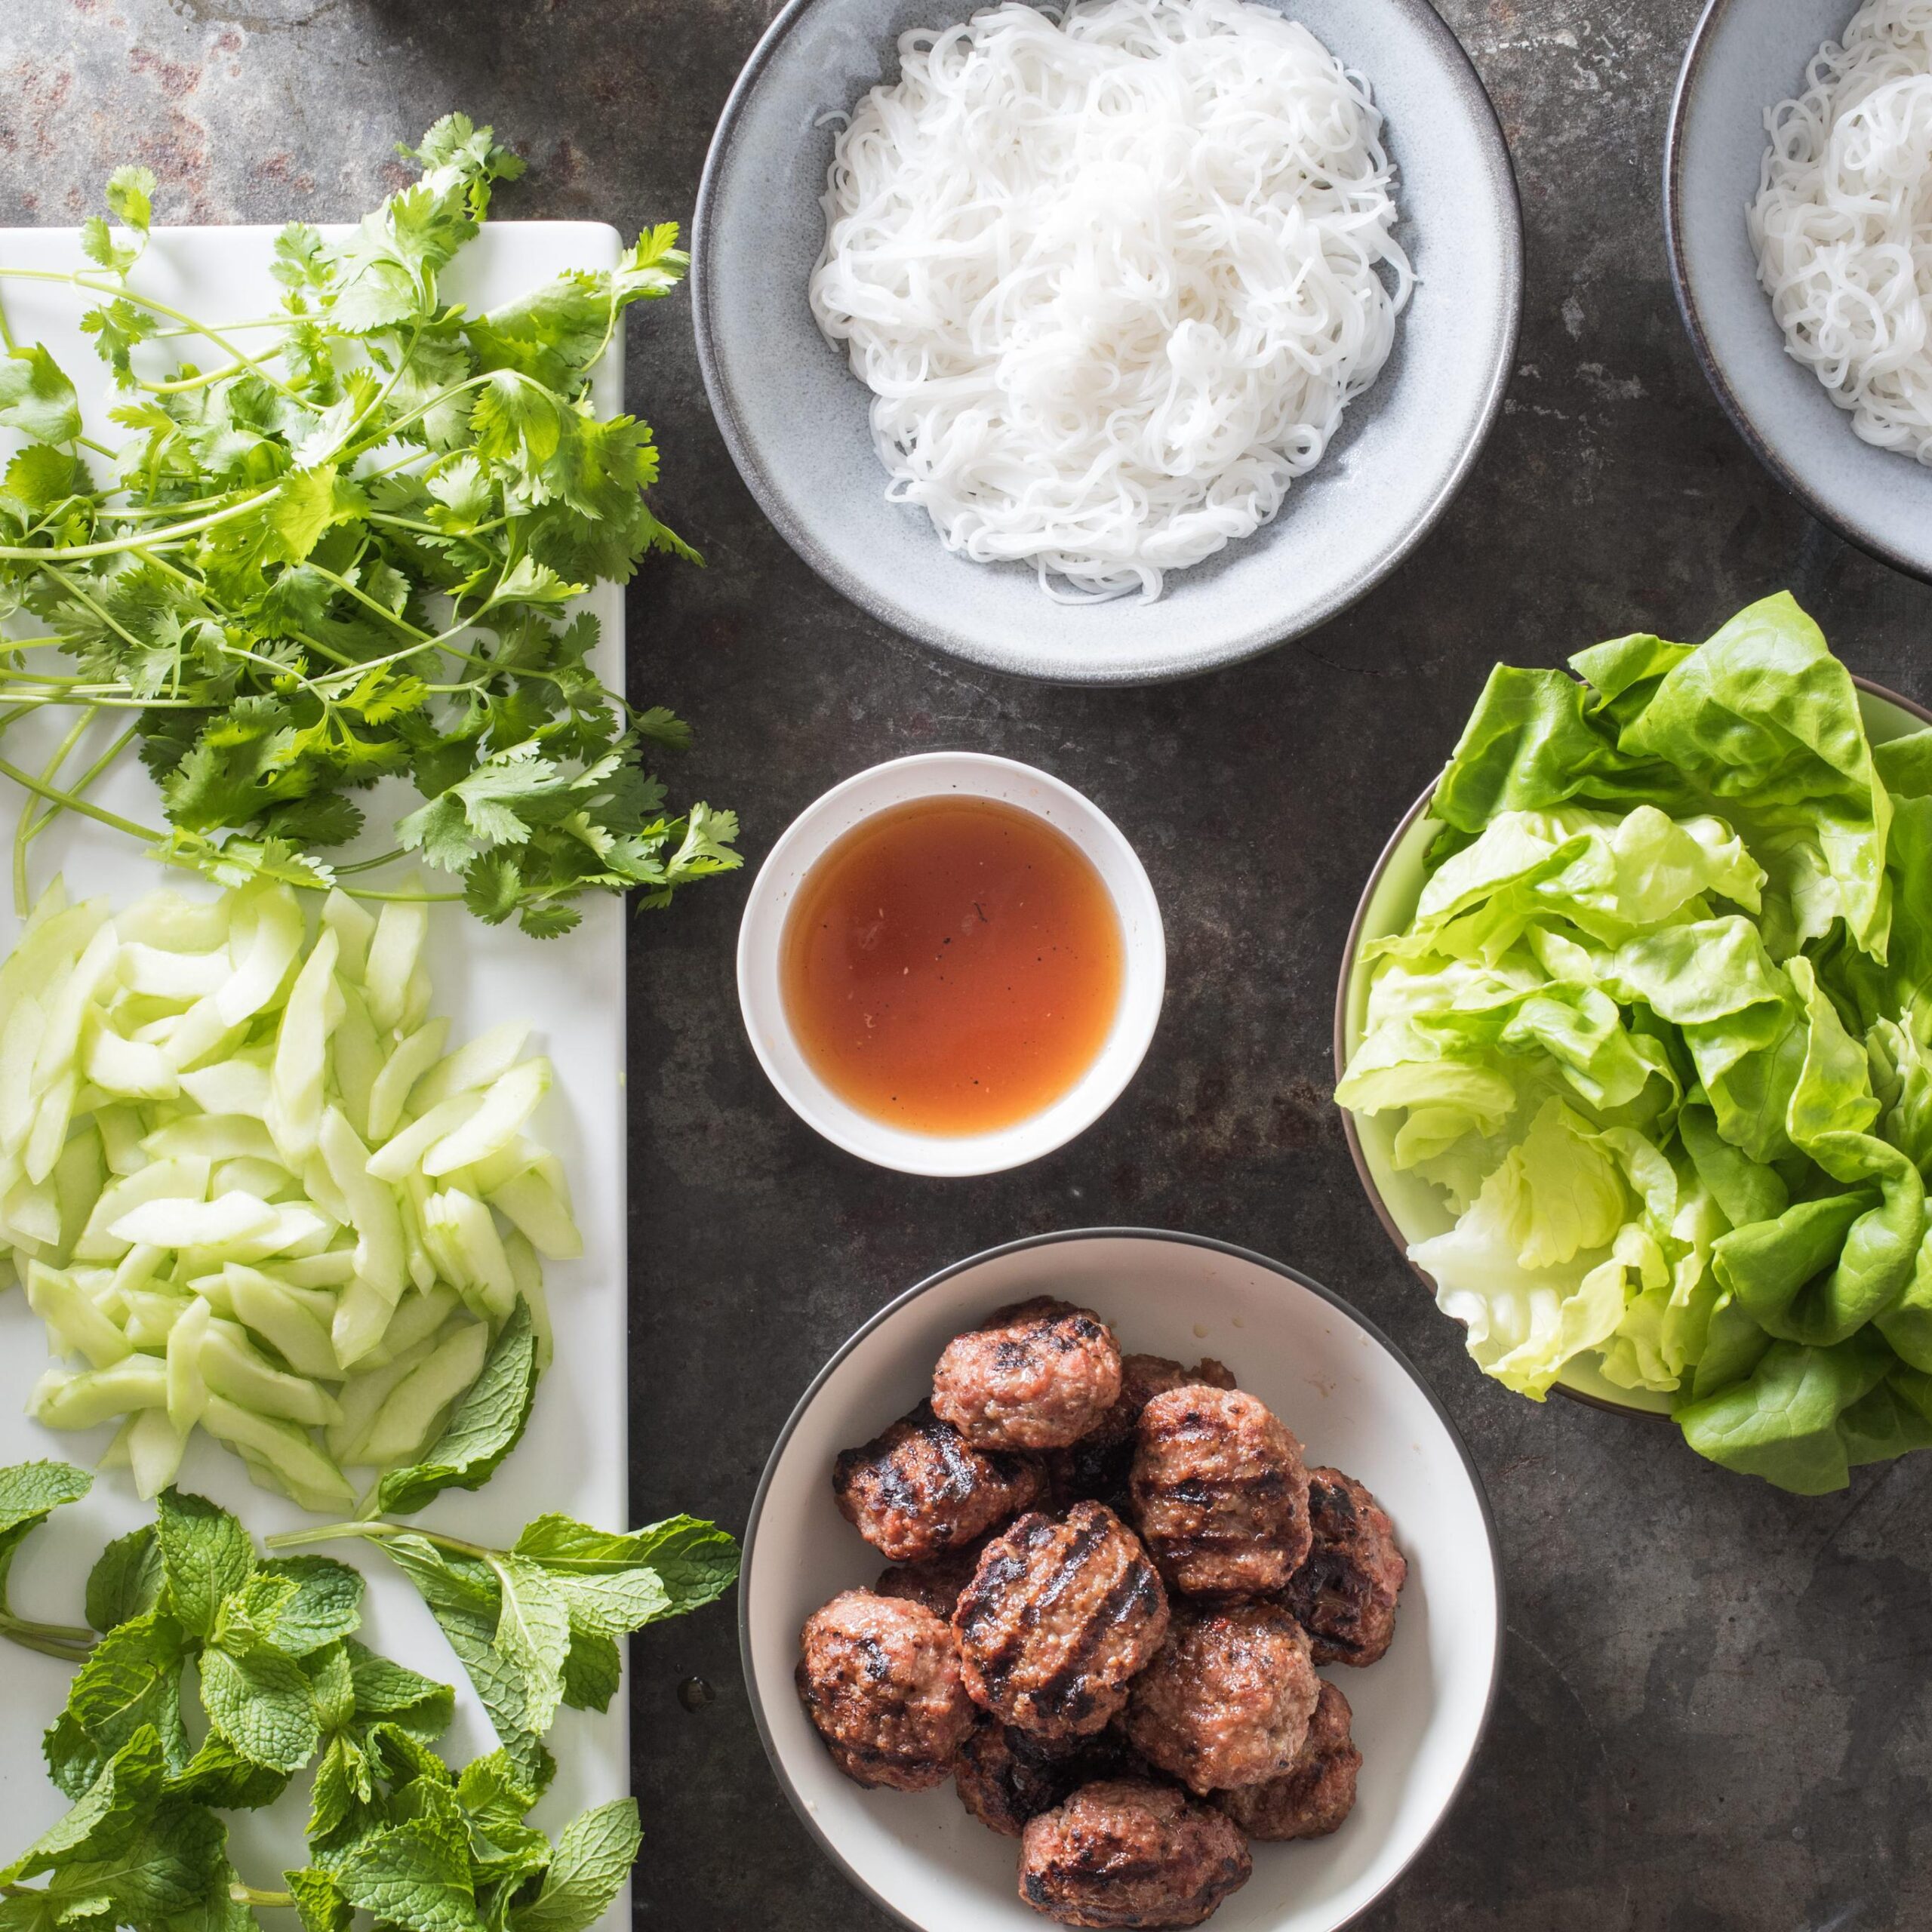  This is my all-time favorite Vietnamese dish, and now it can be yours too!